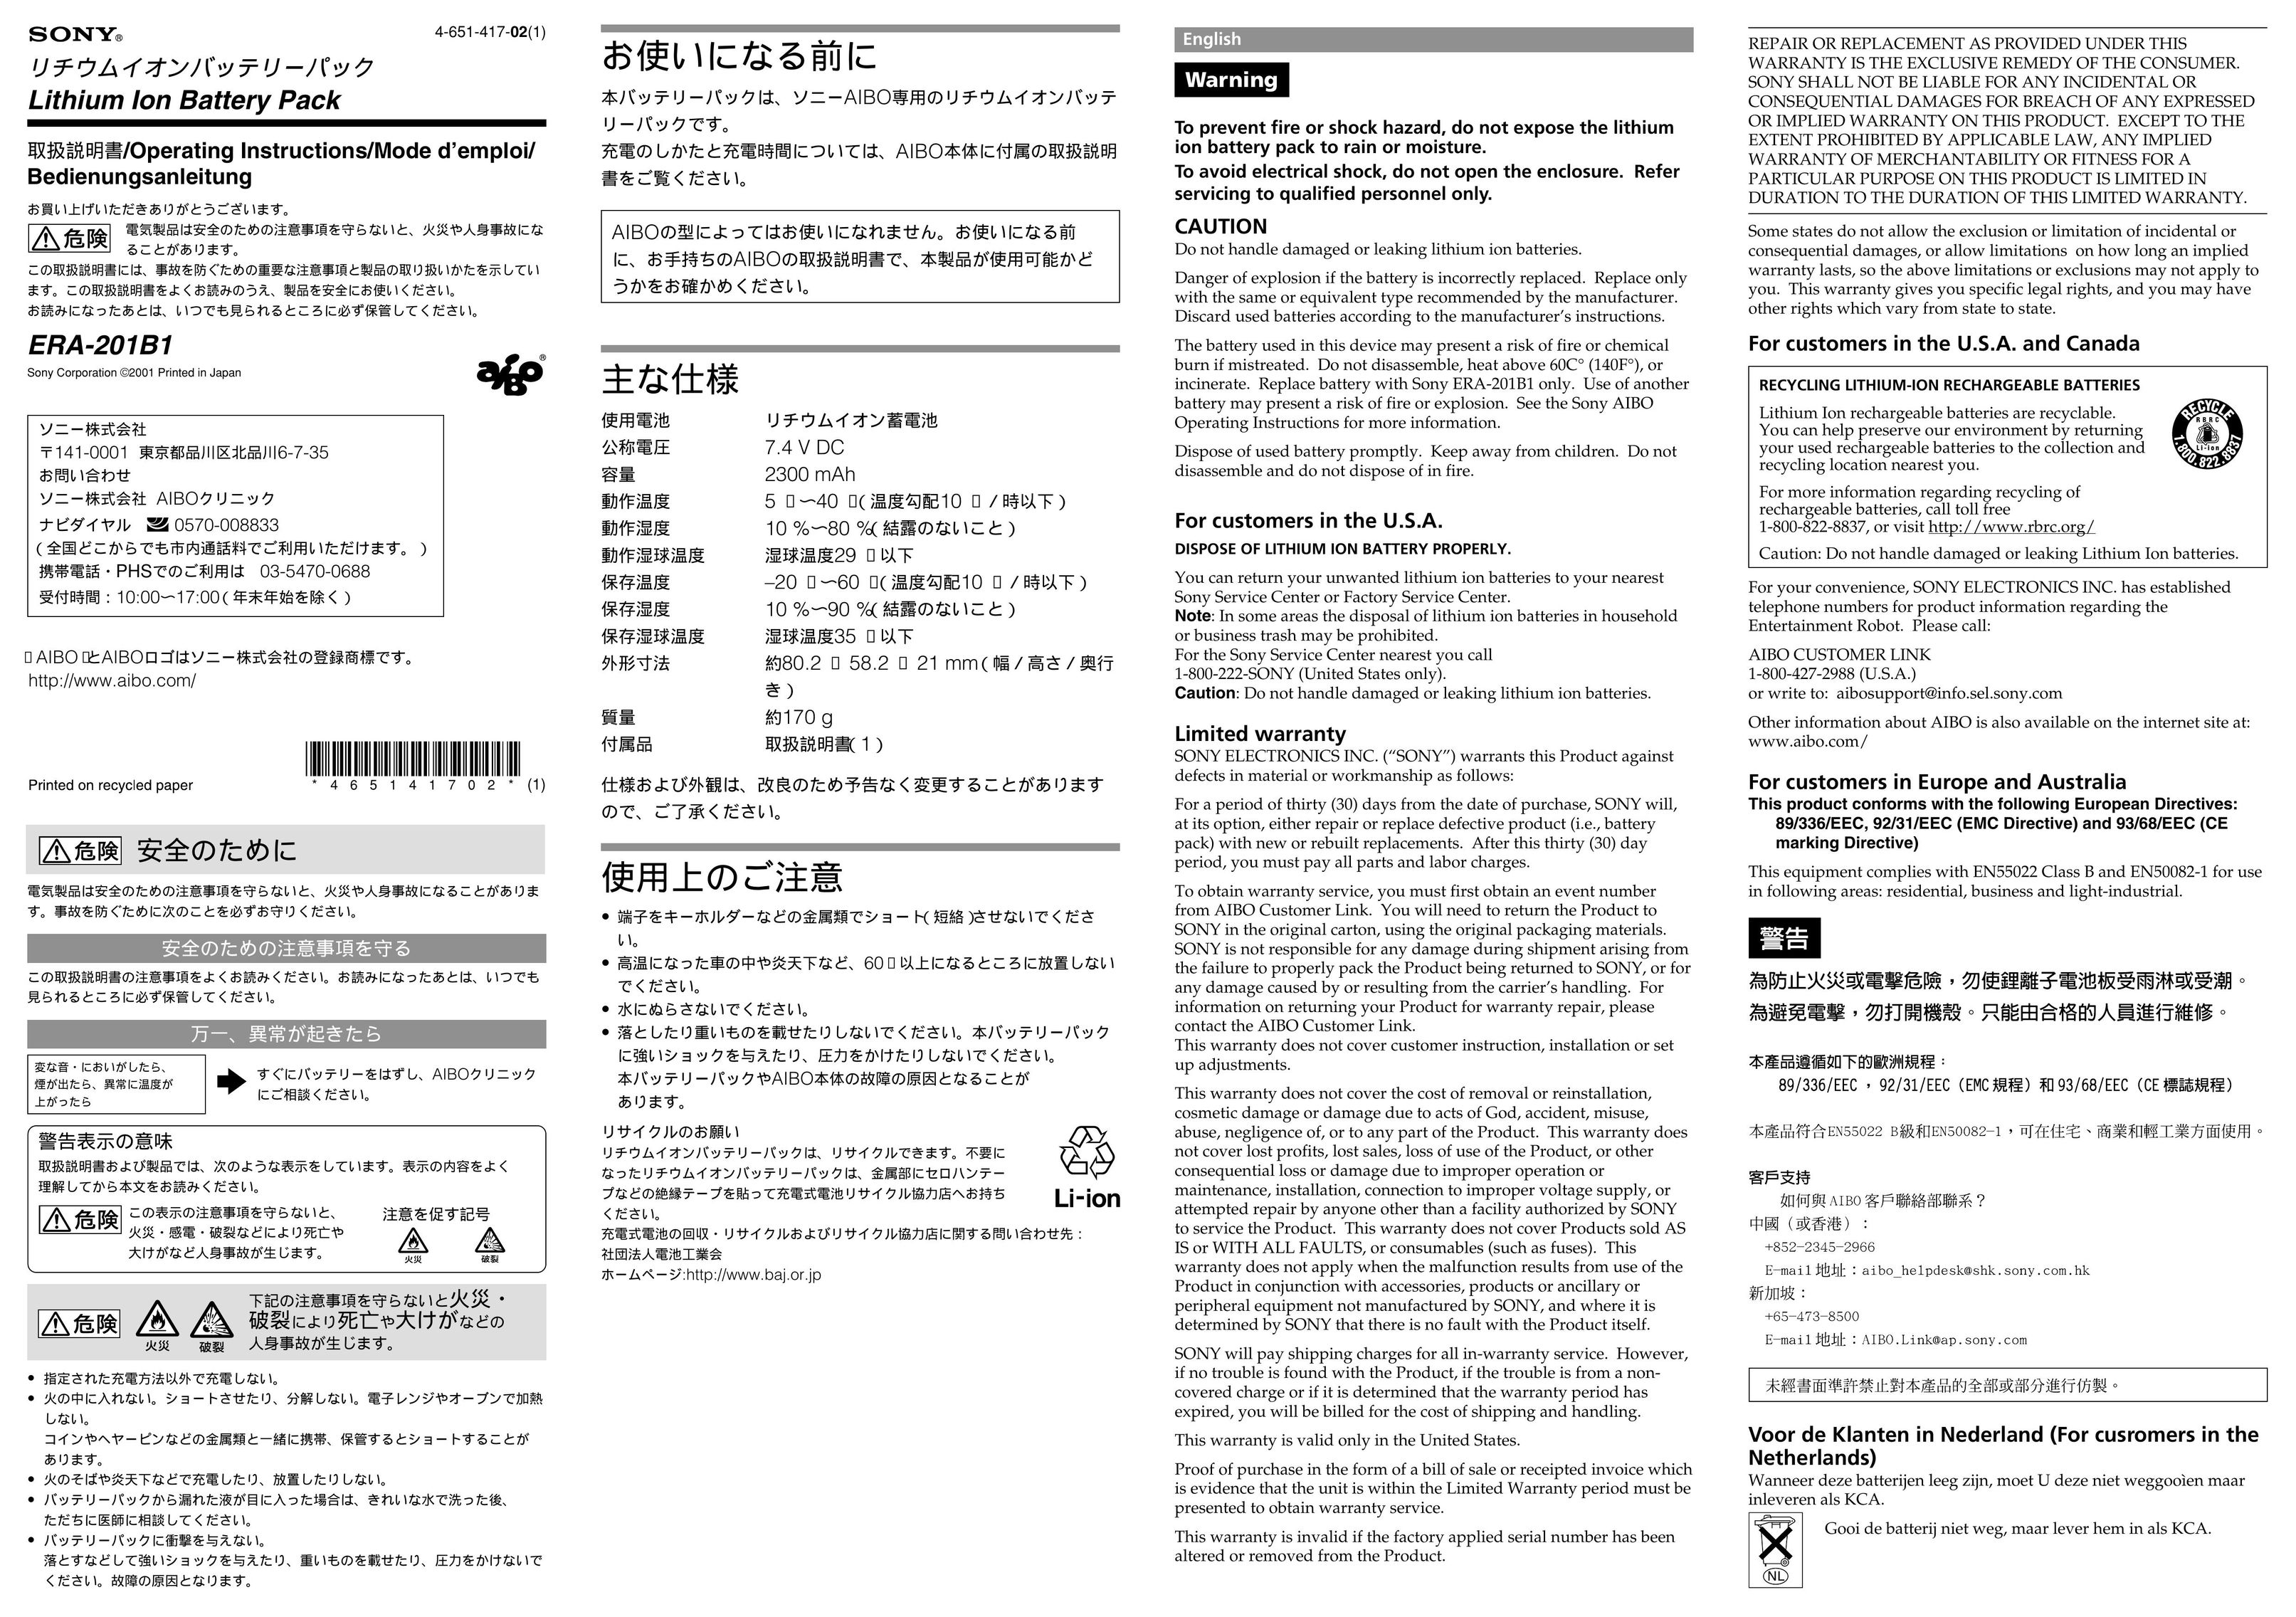 Sony ERA-201B1 Battery Charger User Manual